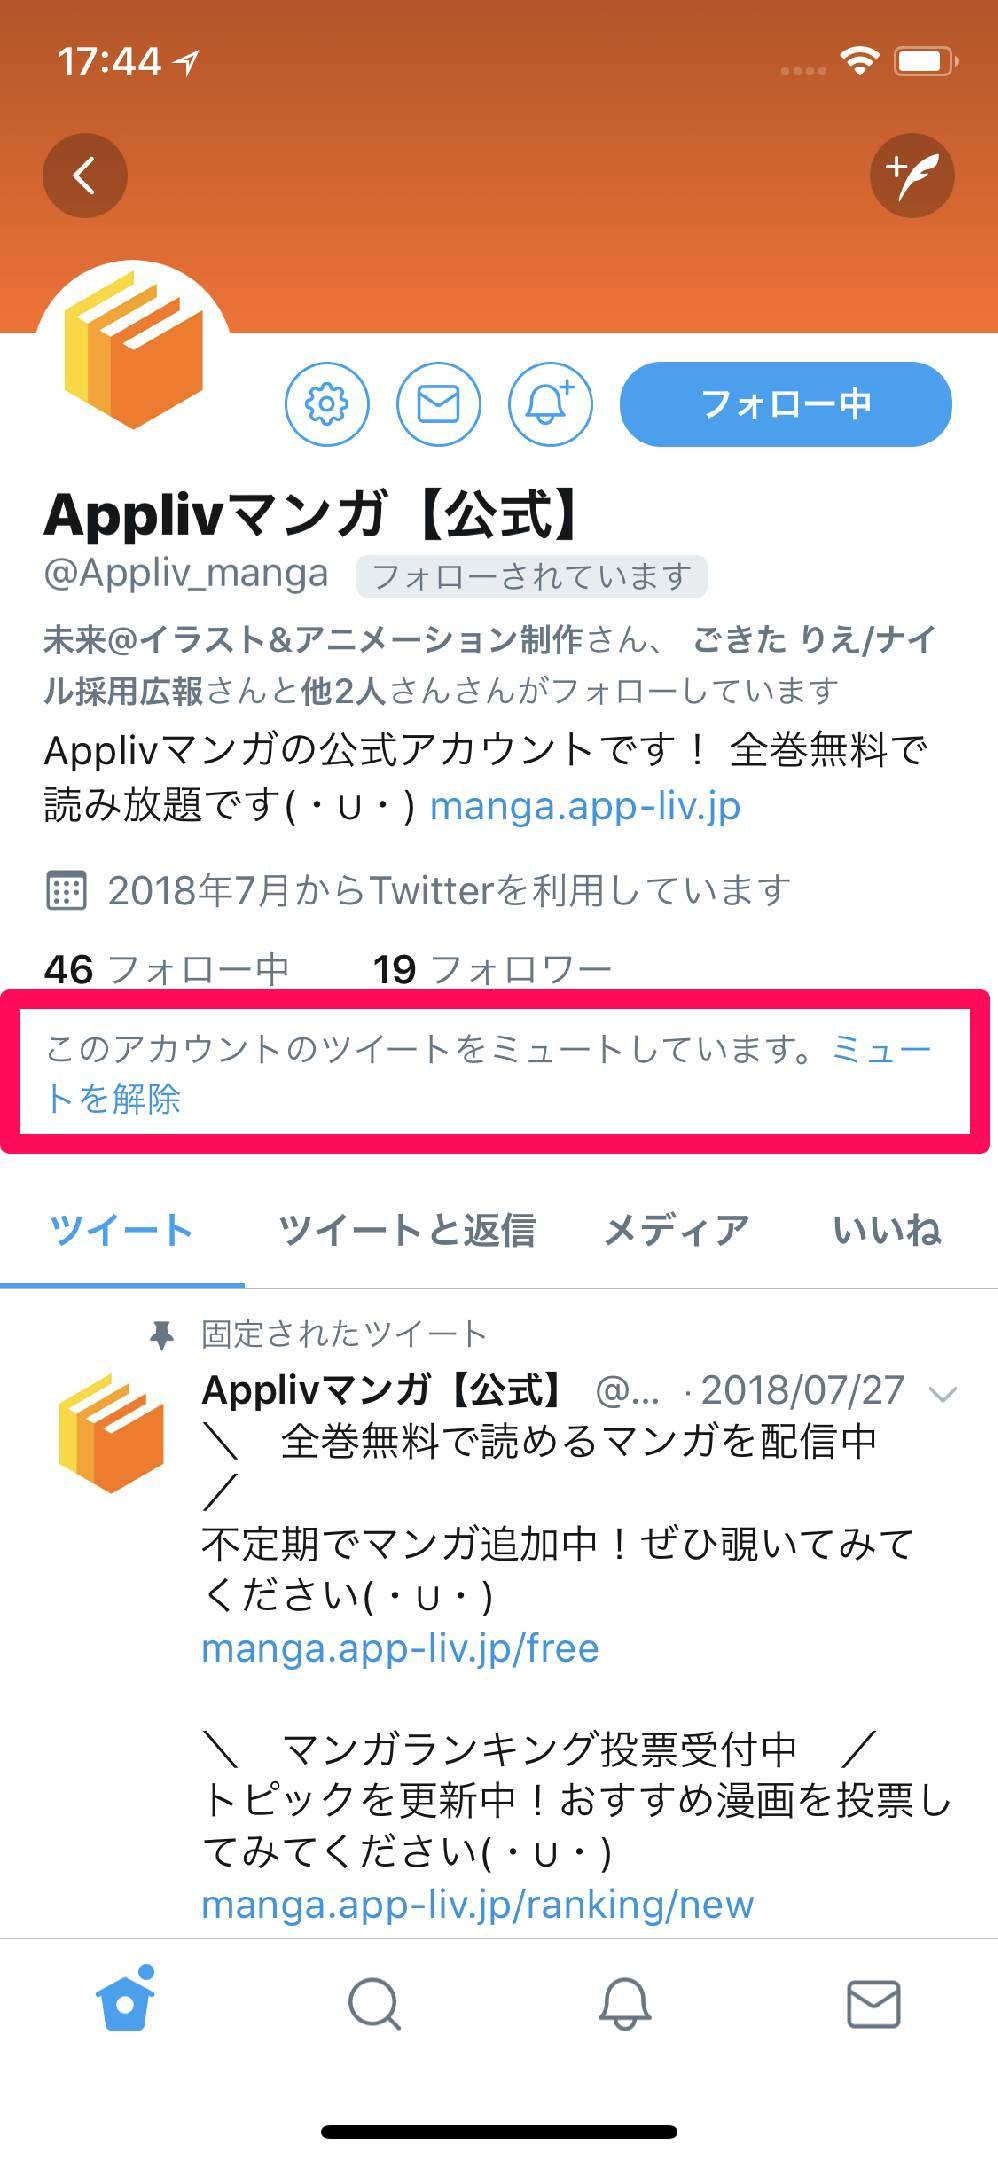 Twitter ミュートのやり方 ブロックとの違いも解説 Iphone Android Pc Appliv Topics